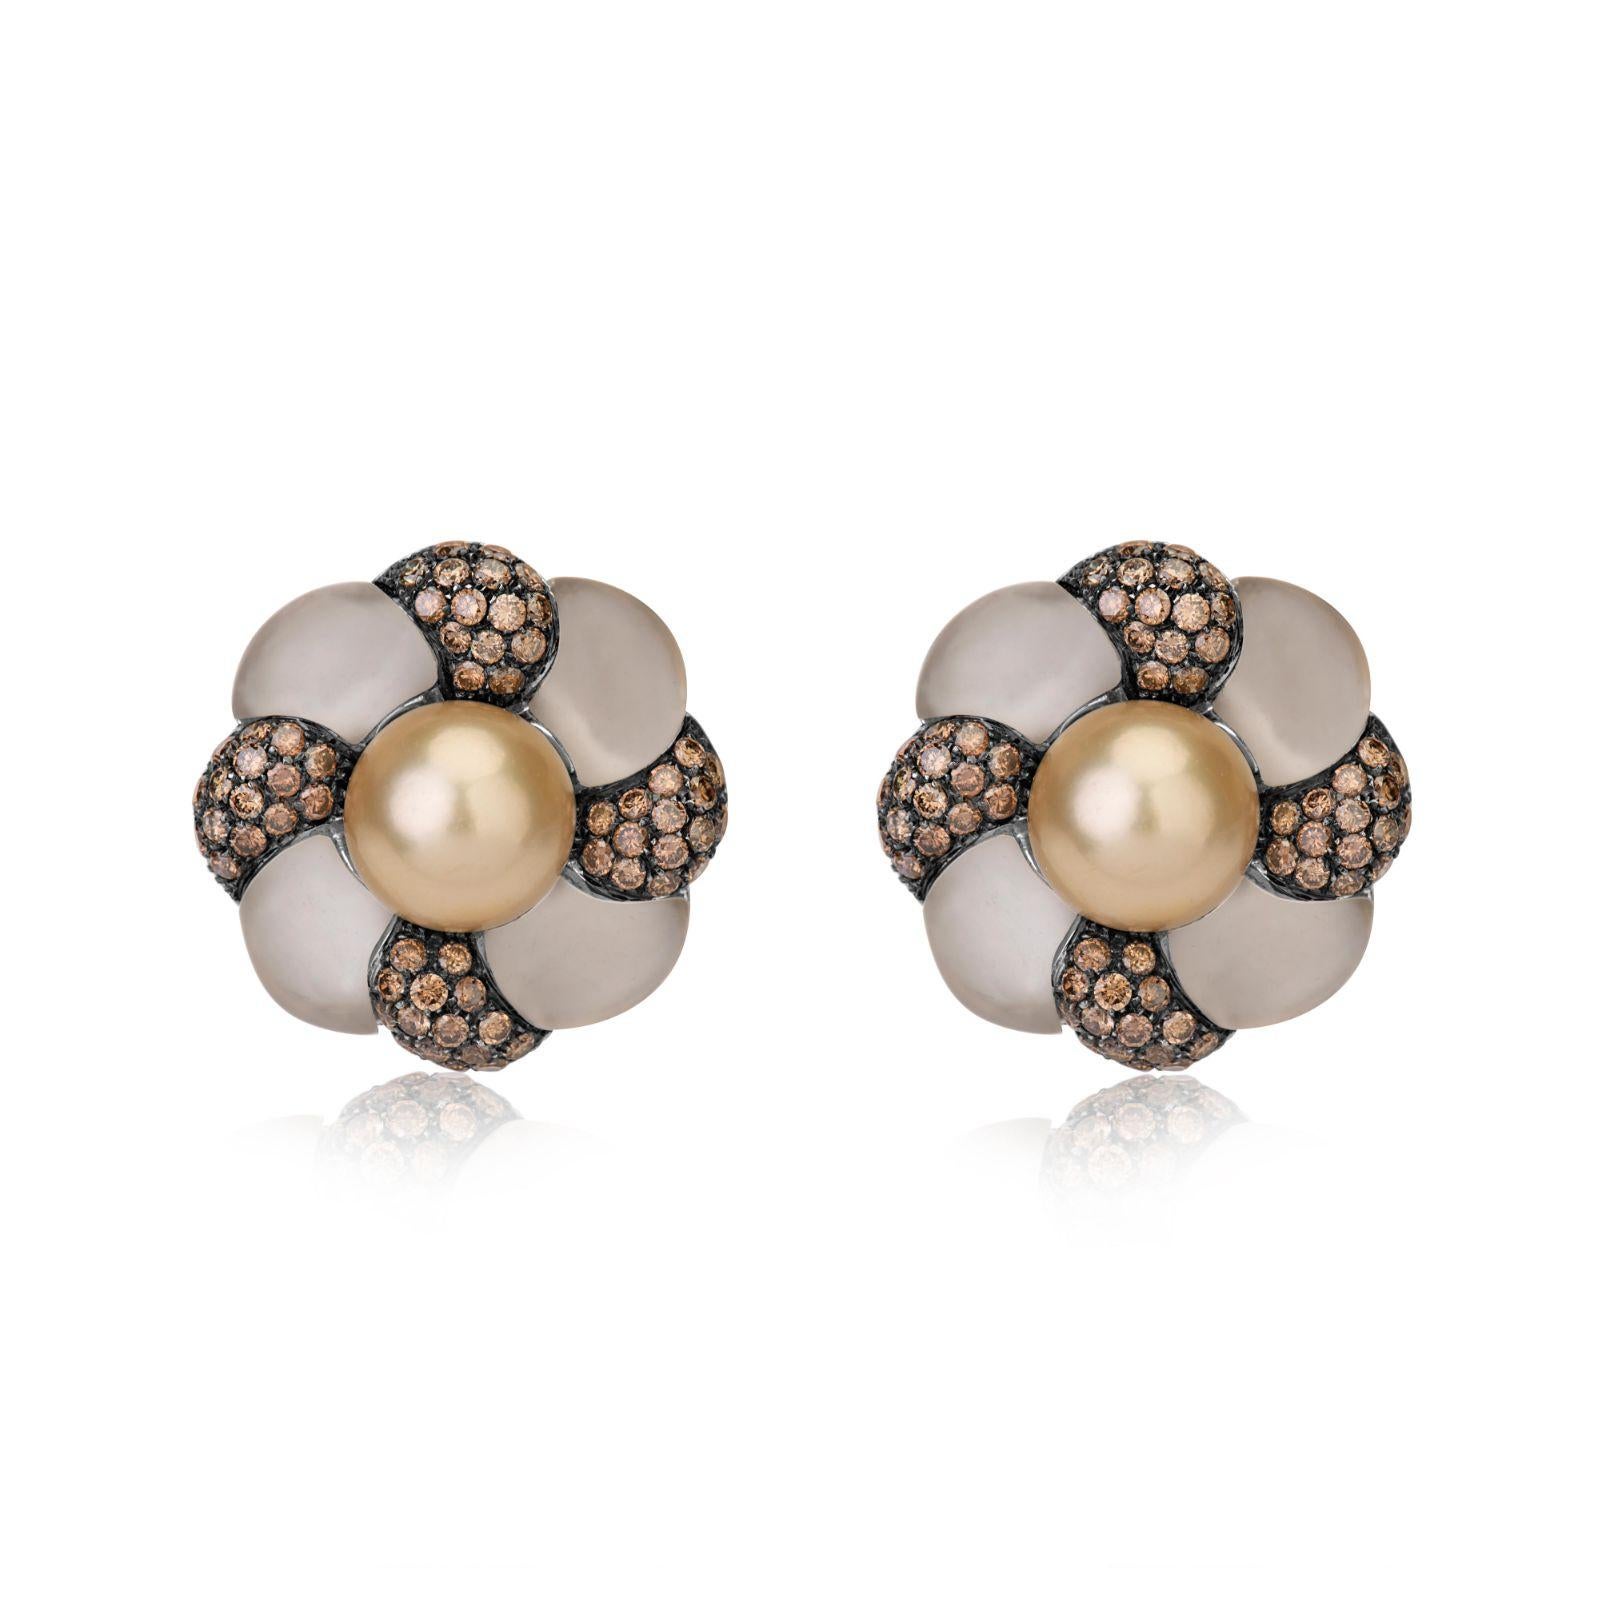 Andreoli Brown Diamond Rock Crystal Golden Pearl 18 Karat Yellow Gold Earrings

These earrings feature:
- 3.73 Carat Brown Diamond
- Rock Crystal
- Golden Pearl
- 25.90 Gram 18K Yellow Gold
- Made In Italy